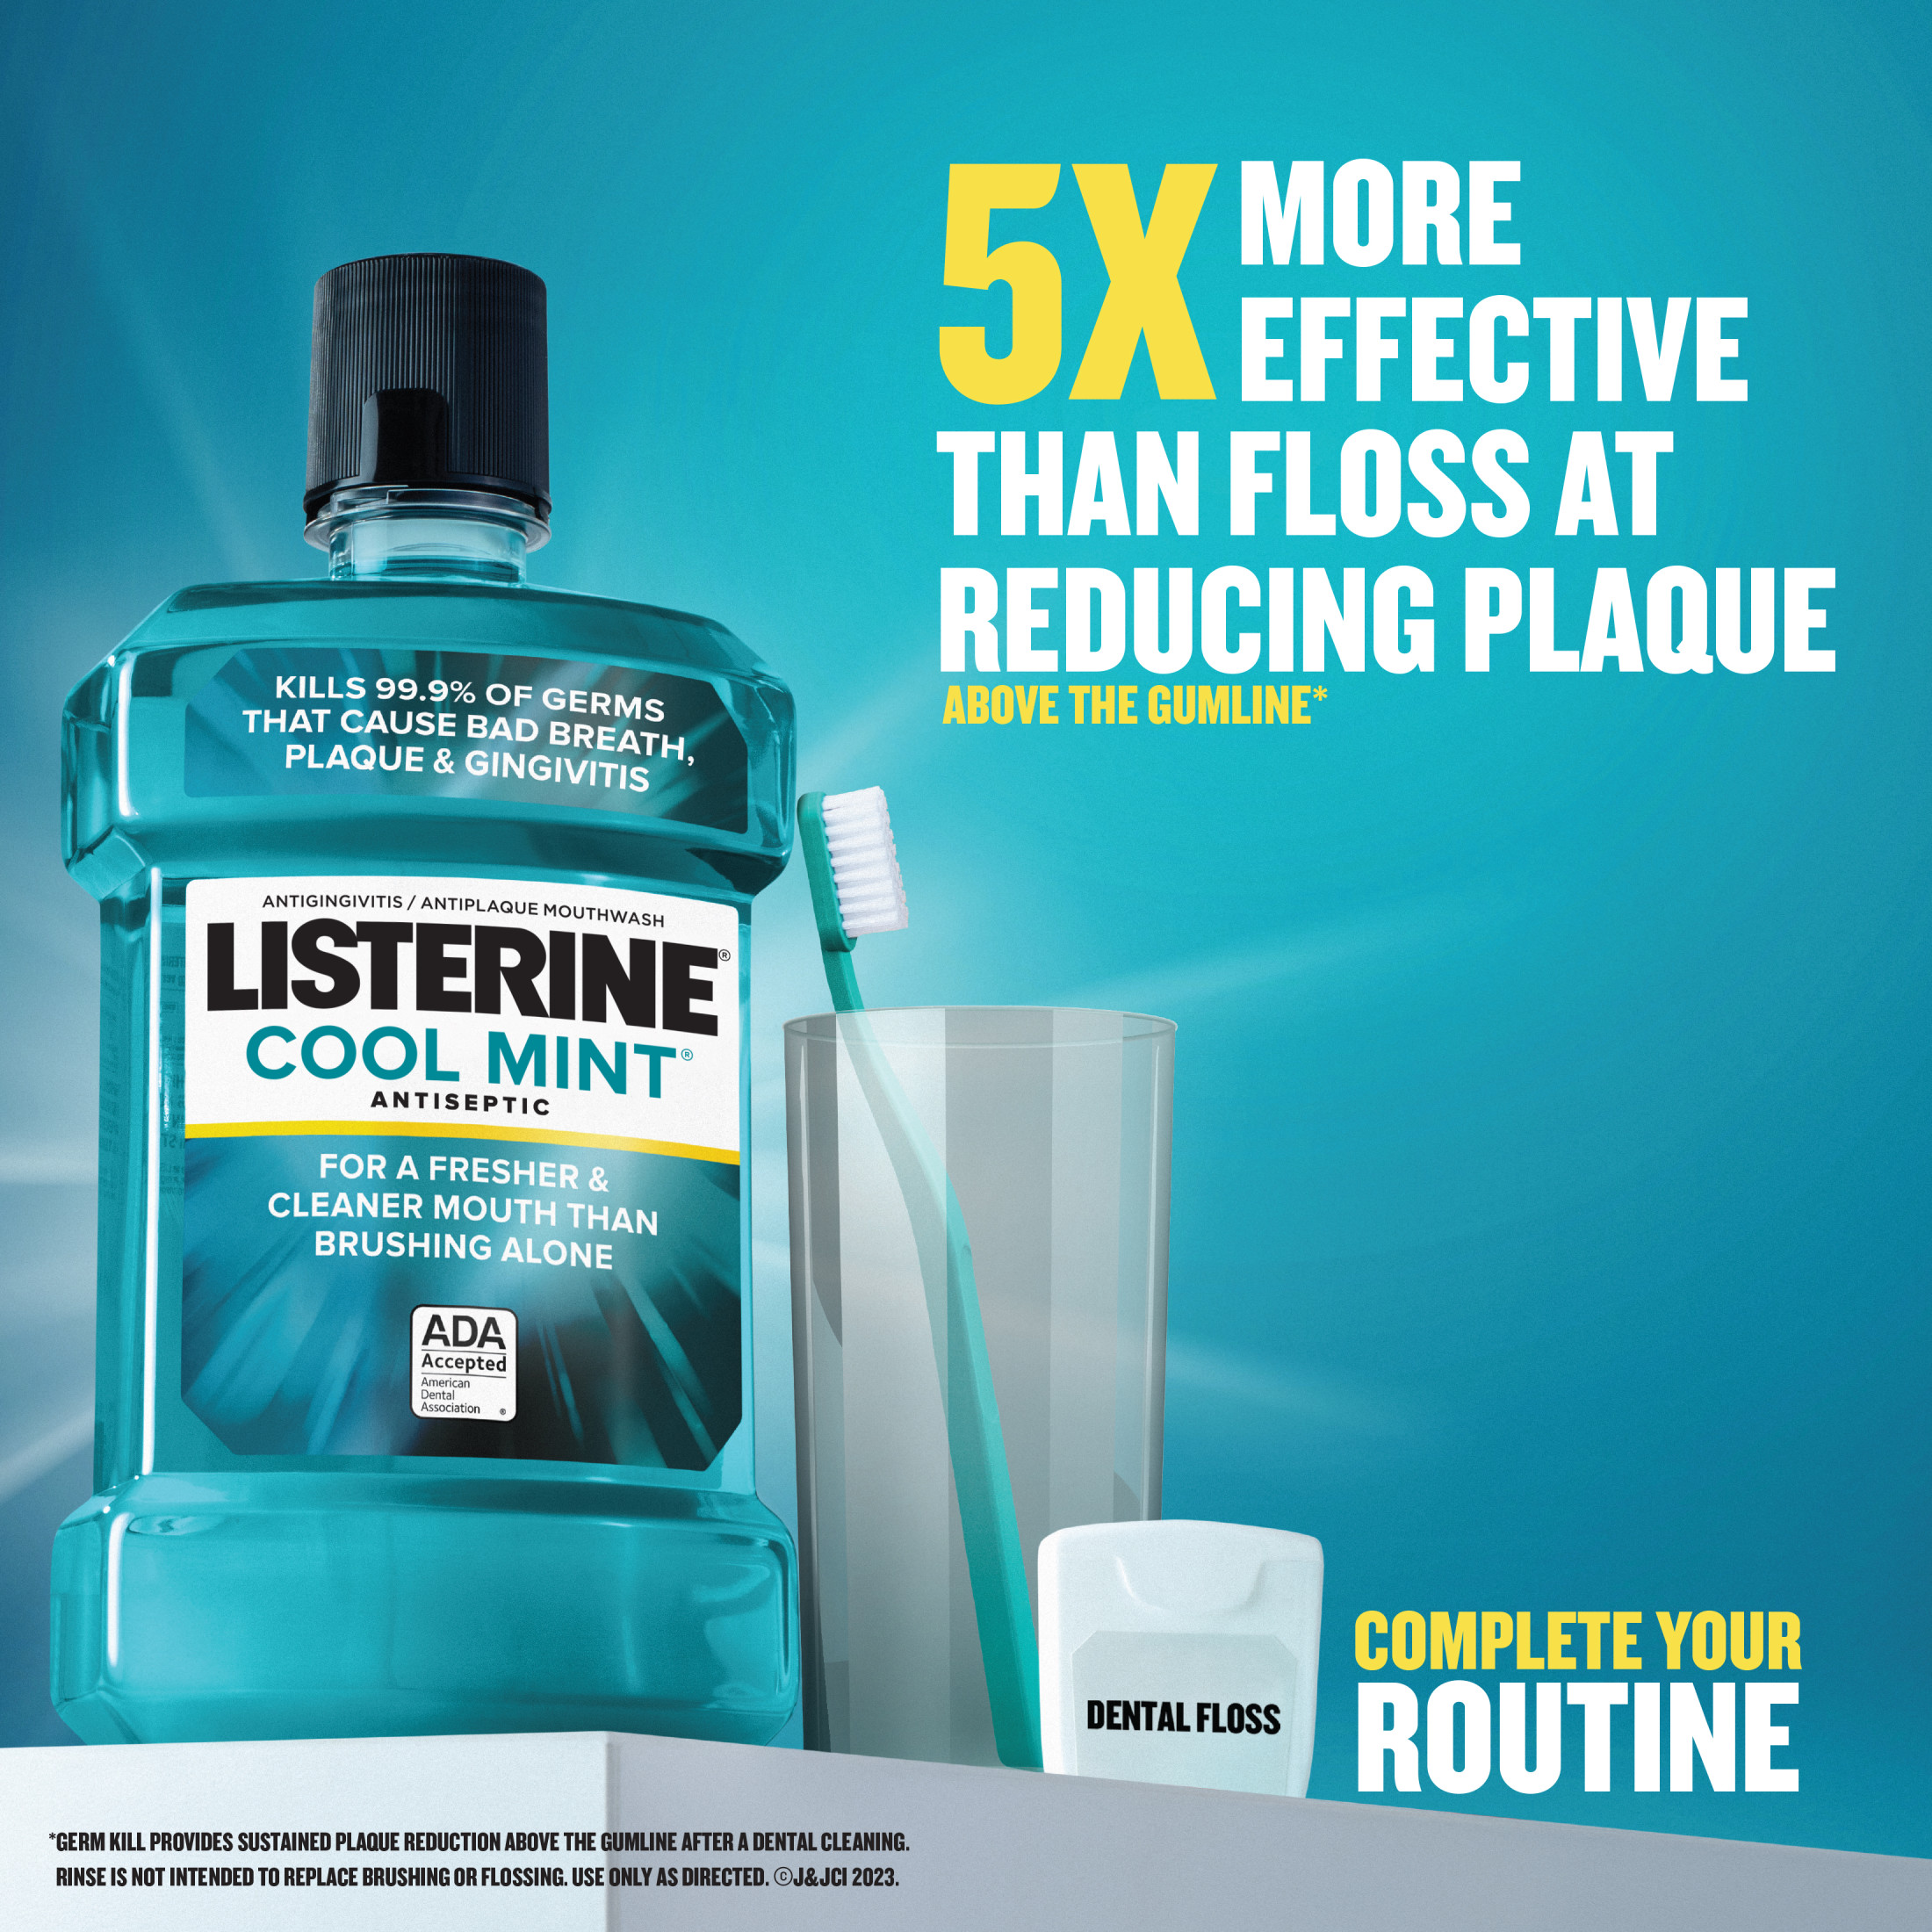 Listerine Cool Mint Antiseptic Mouthwash/Mouth Rinse for Bad Breath & Plaque, 1 L - image 4 of 12